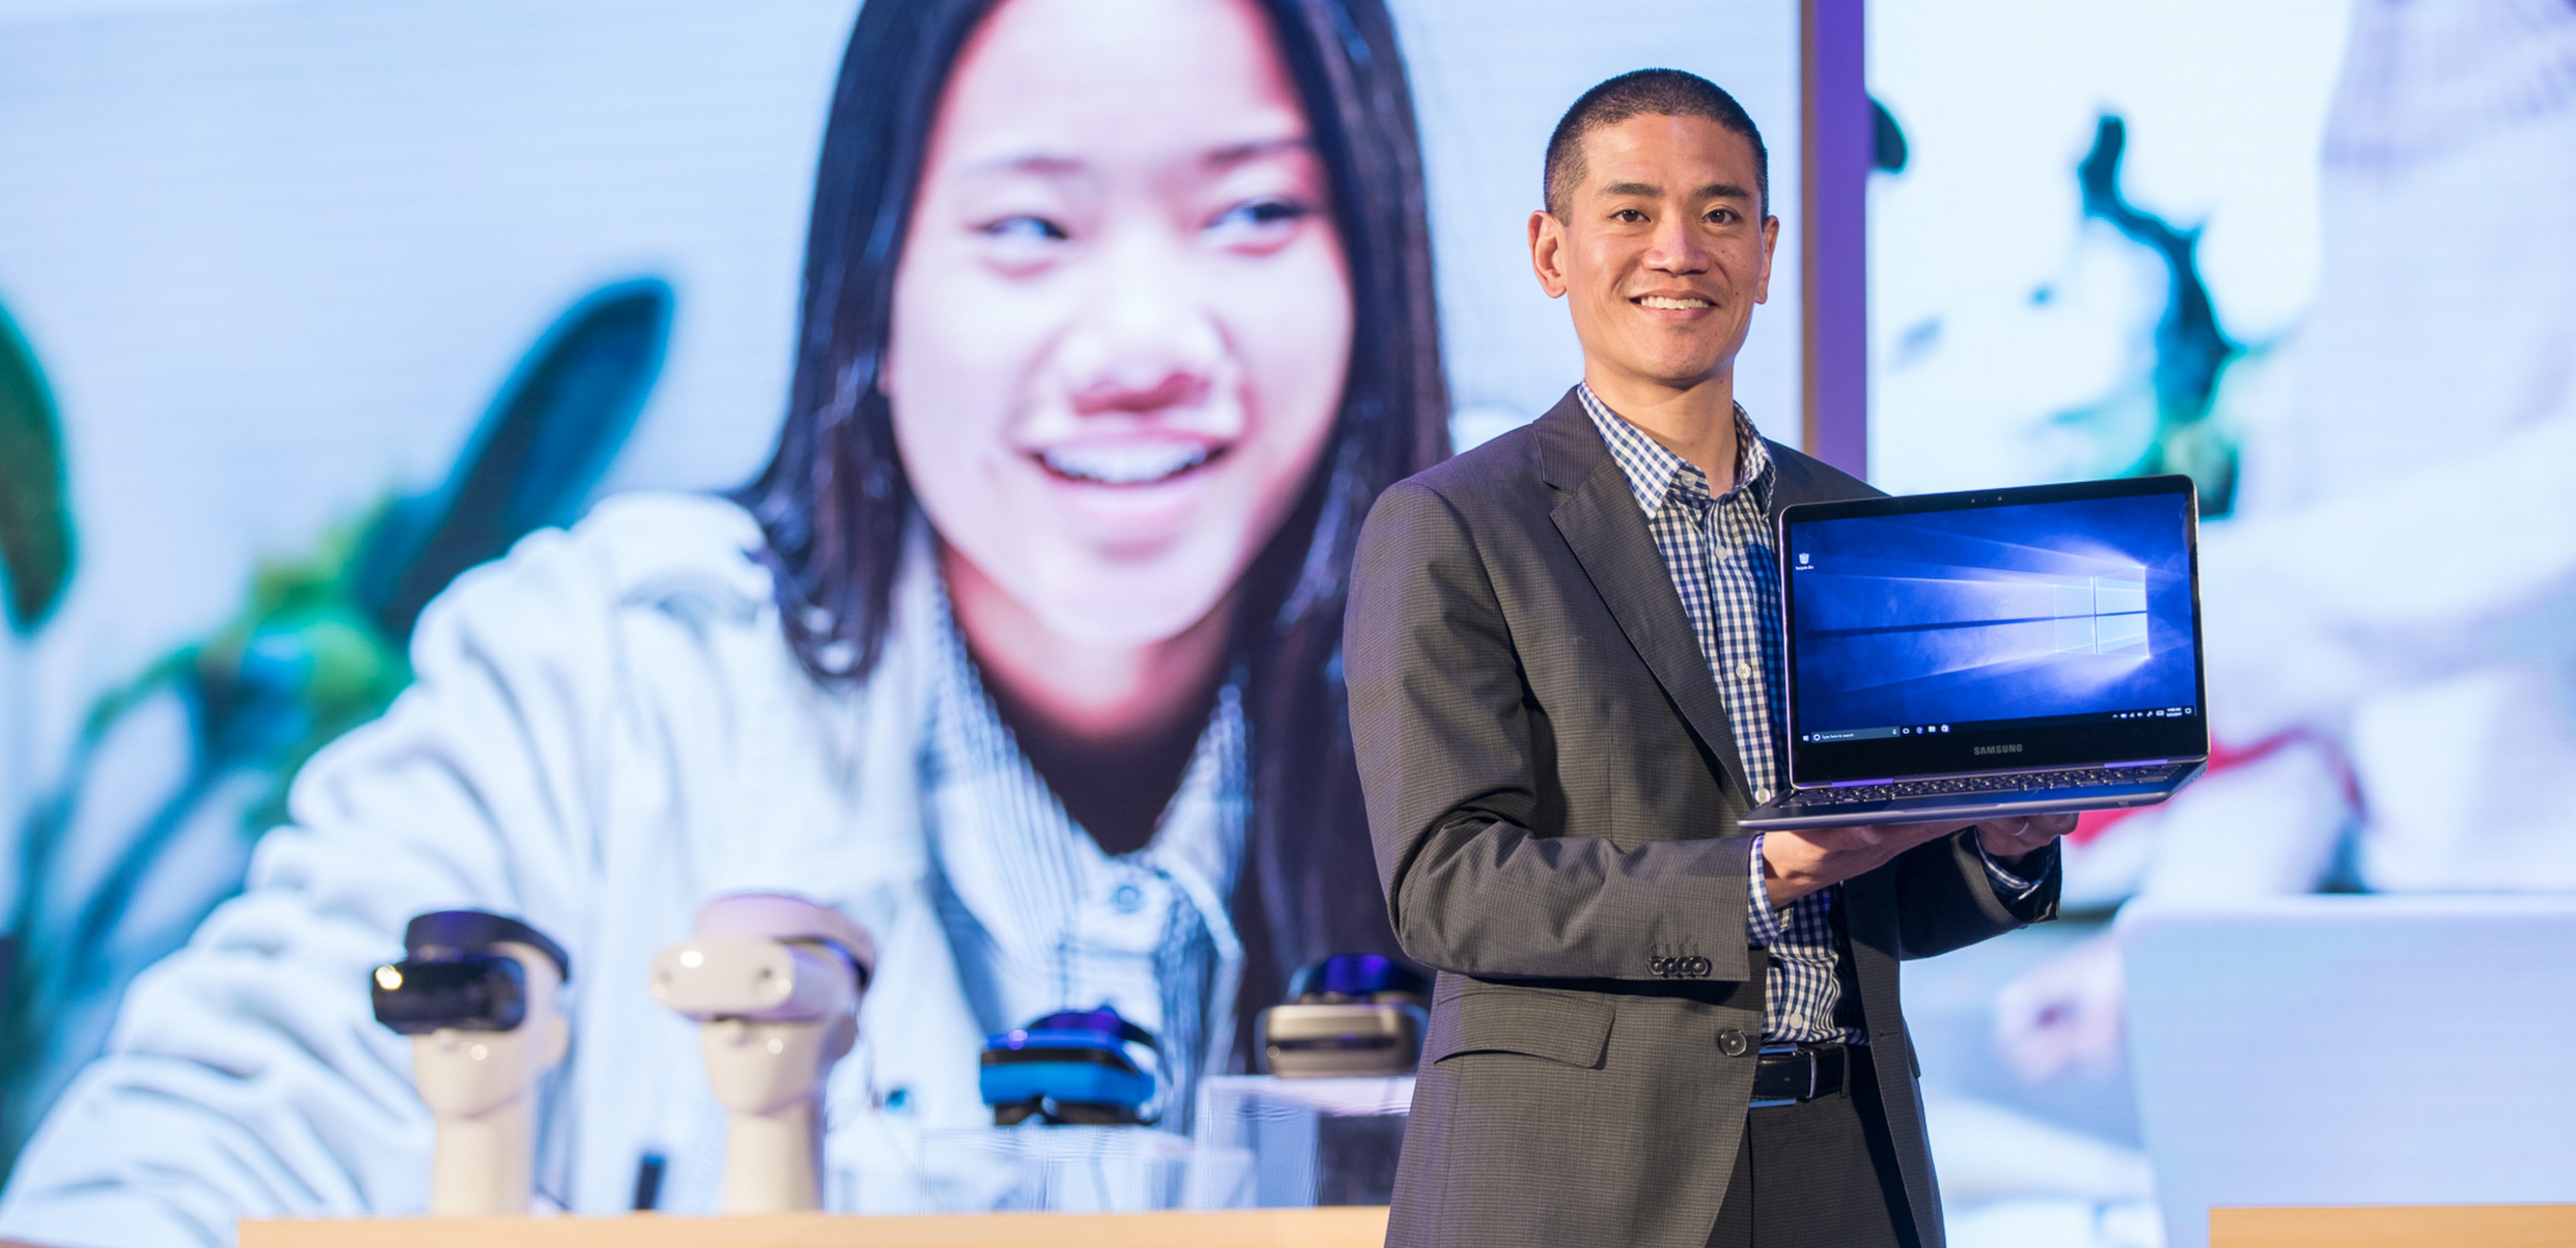 Peter Han shows Samsung Notebook 9 Pro publicly for the first time during Microsoft’s Computex keynote